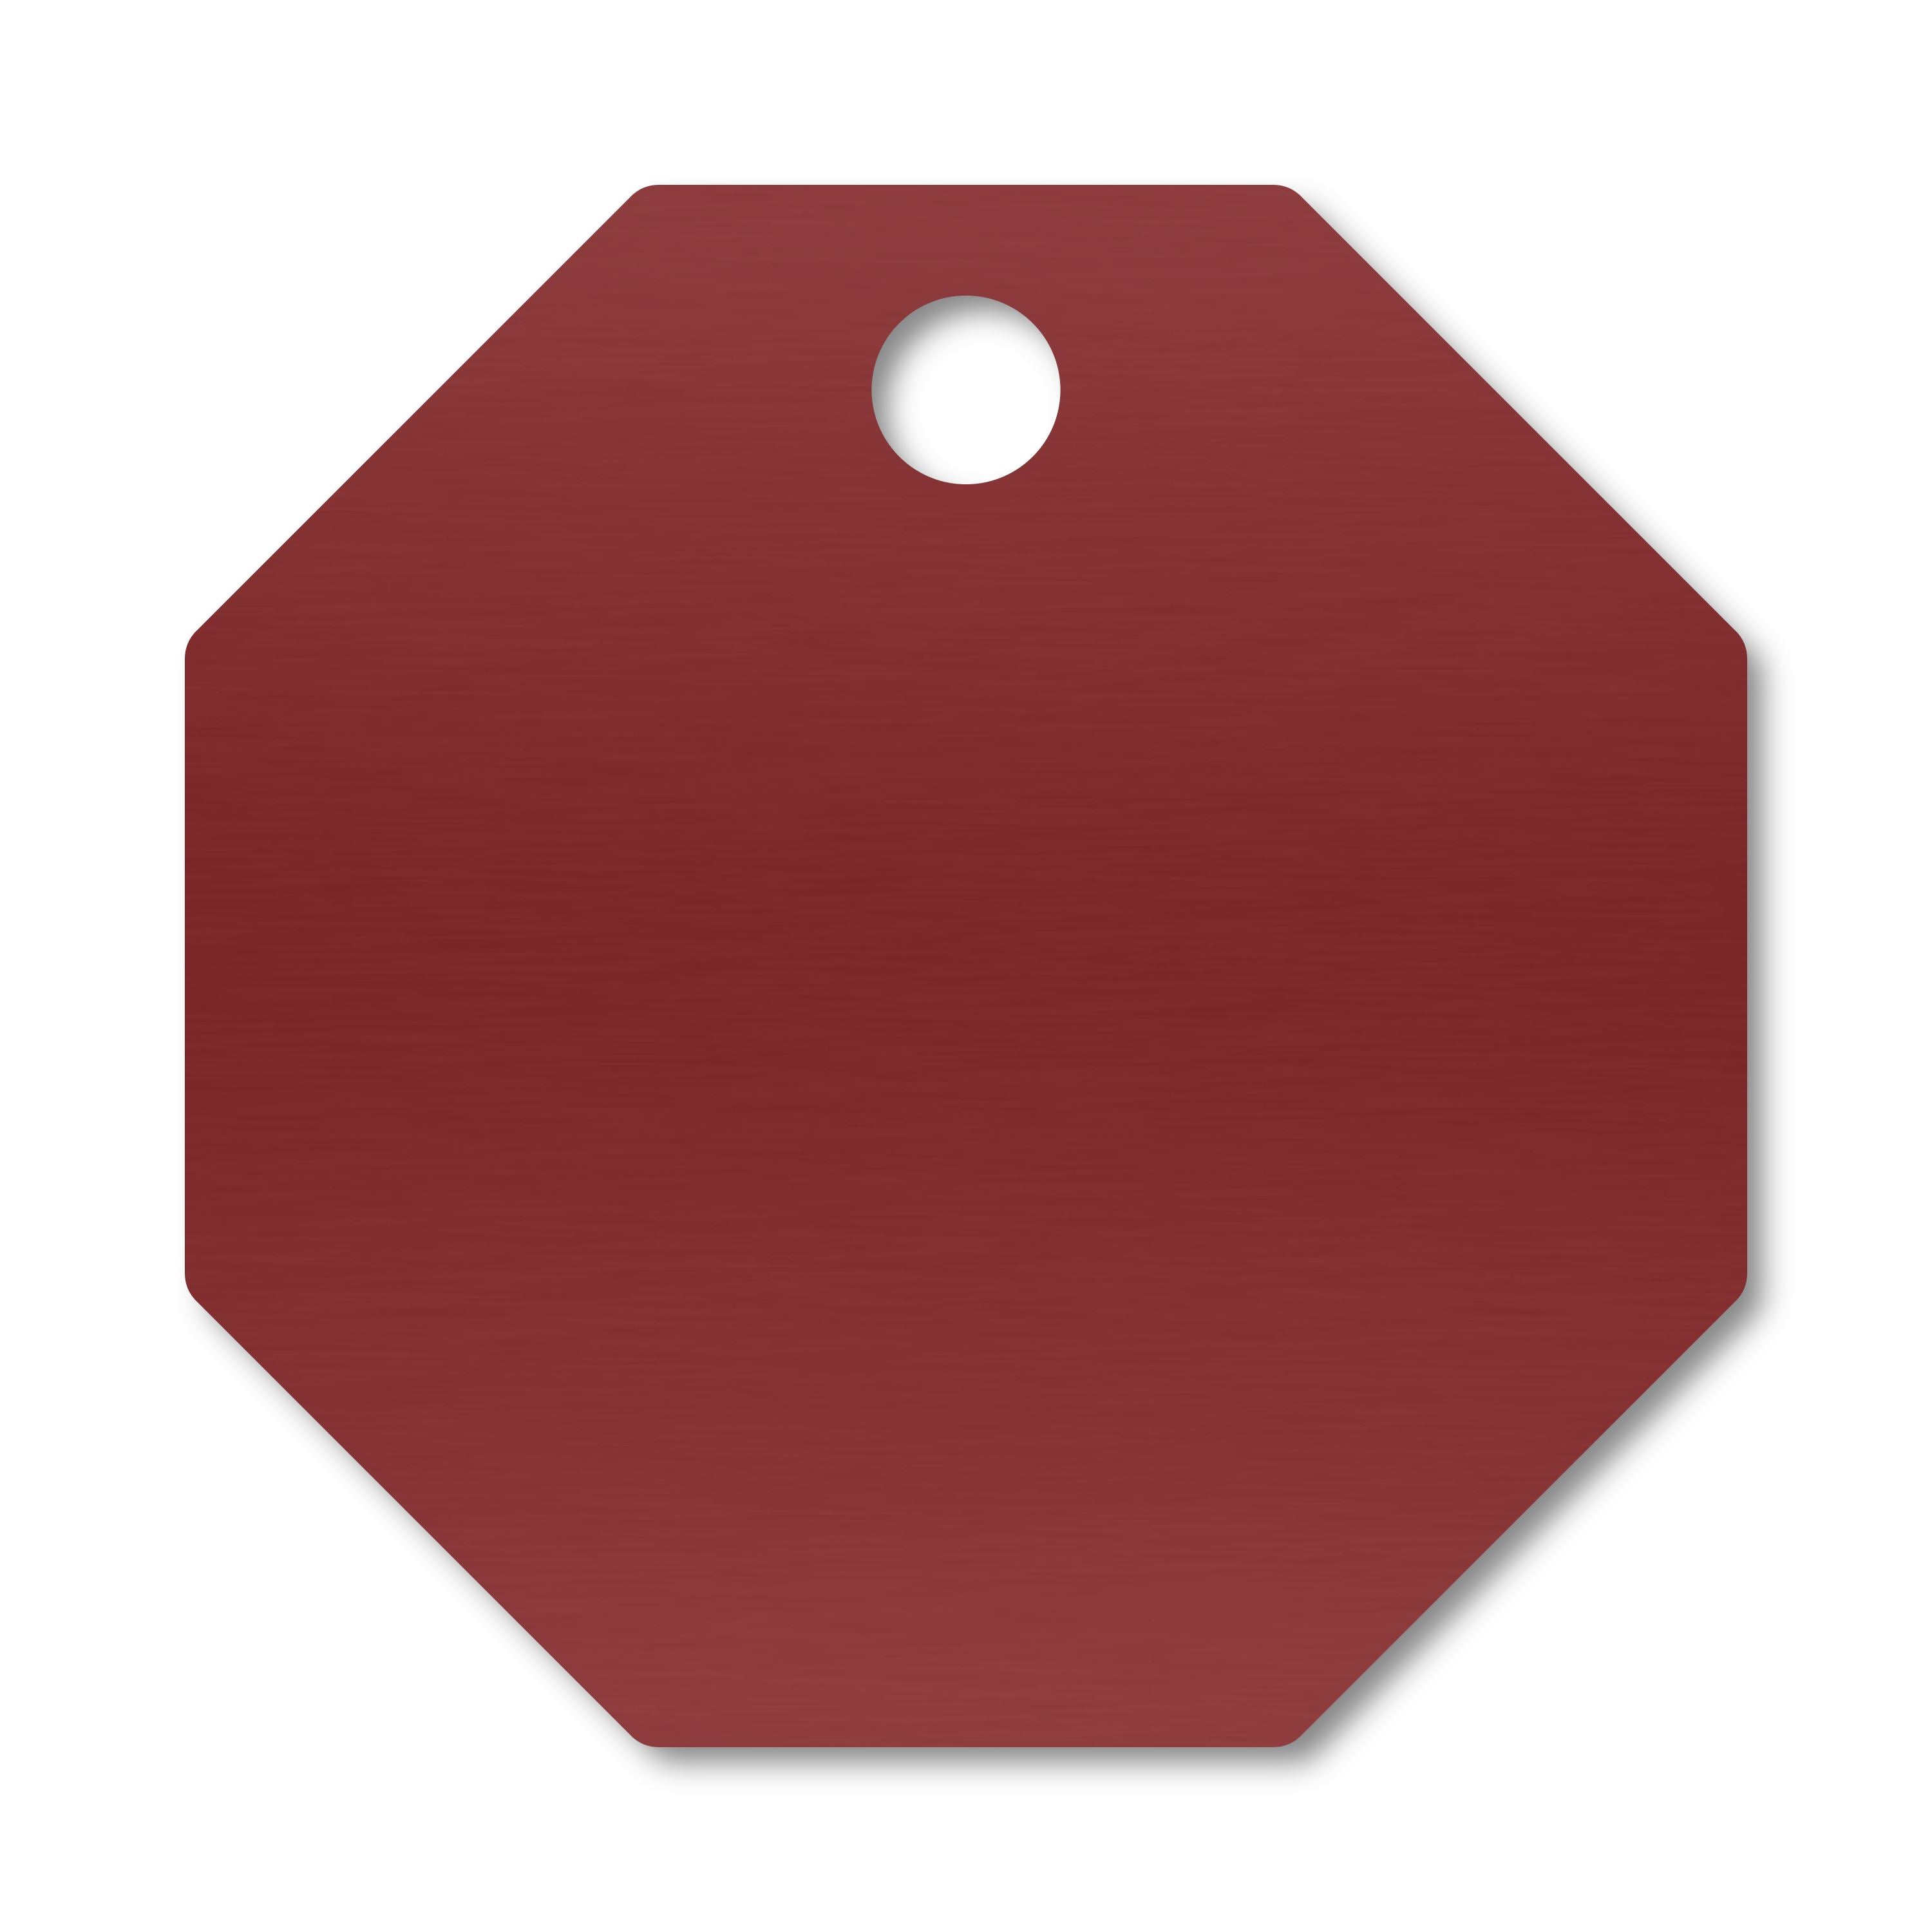 Anodized Aluminum Octagon Tags, 1-1/8" with 1/8" Hole, Laser Engraved Metal Tags Craftworks NW Red 